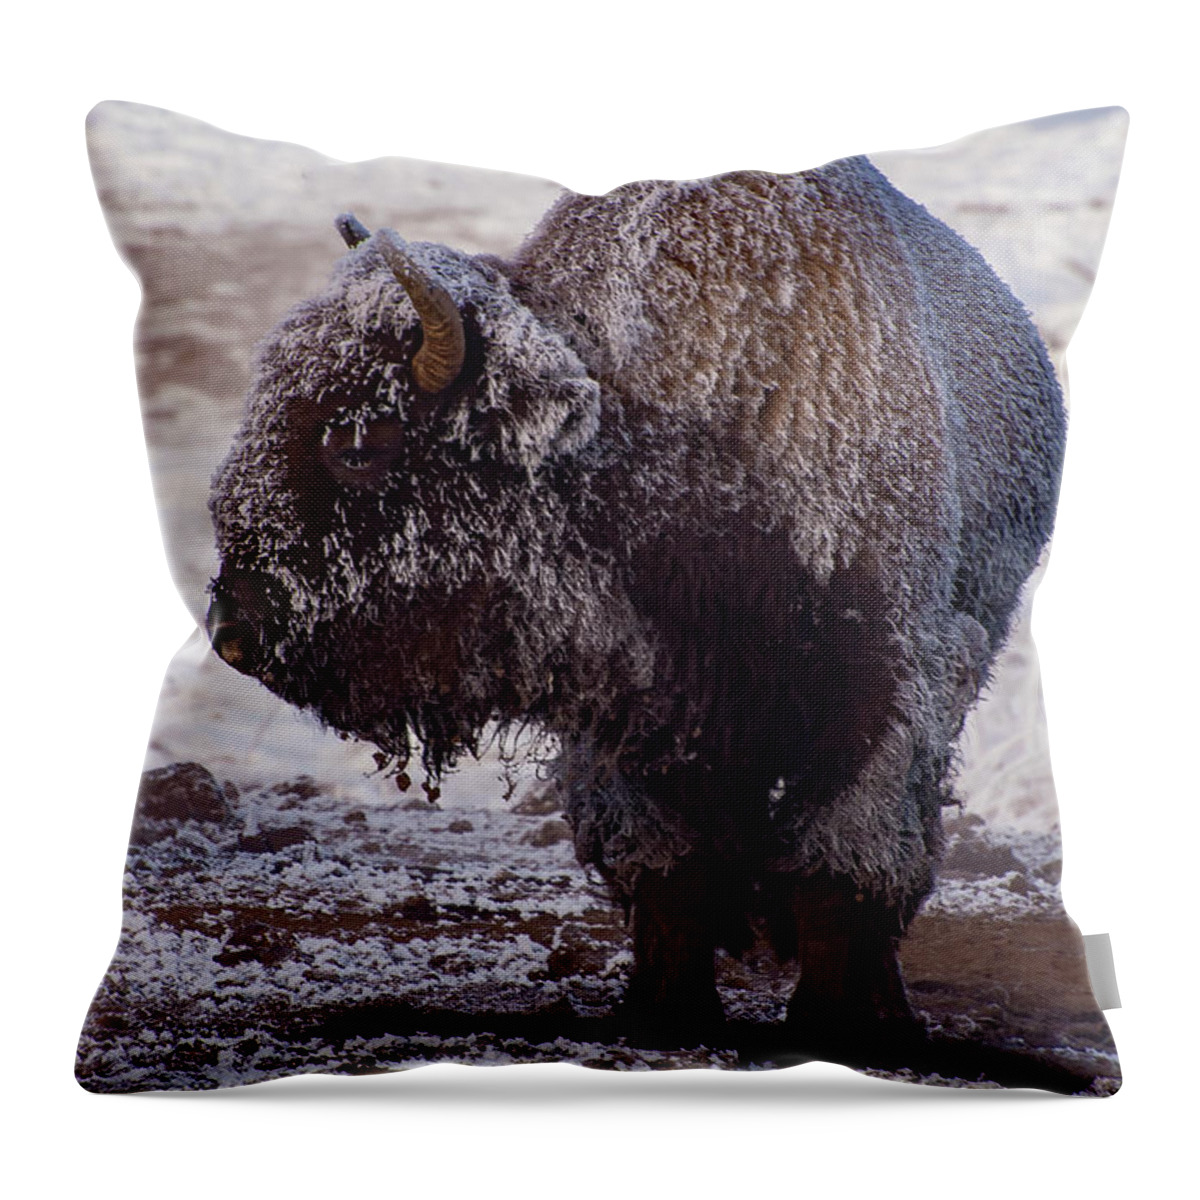 Yellowstone National Park Throw Pillow featuring the photograph Old Frosty by Bob Phillips